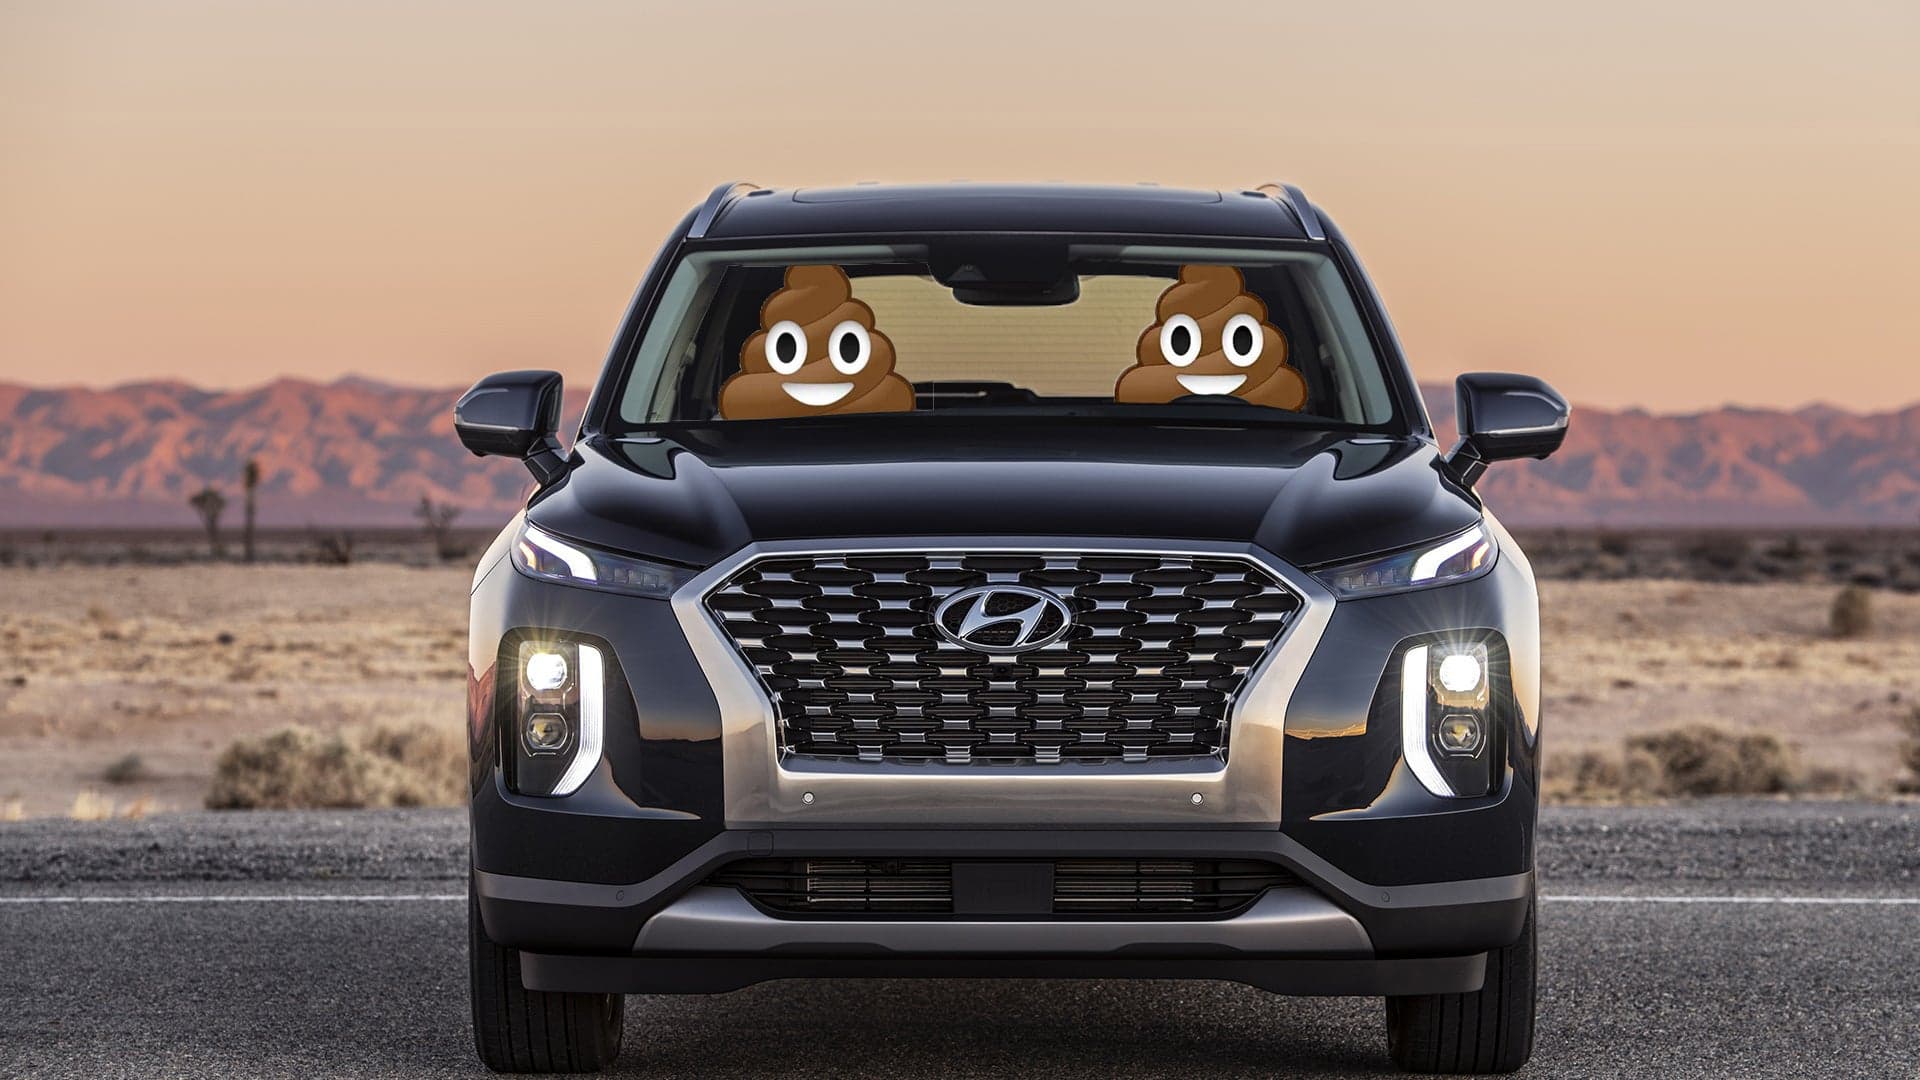 Hyundai Doesn’t Know Why the Palisade SUV Stinks Inside